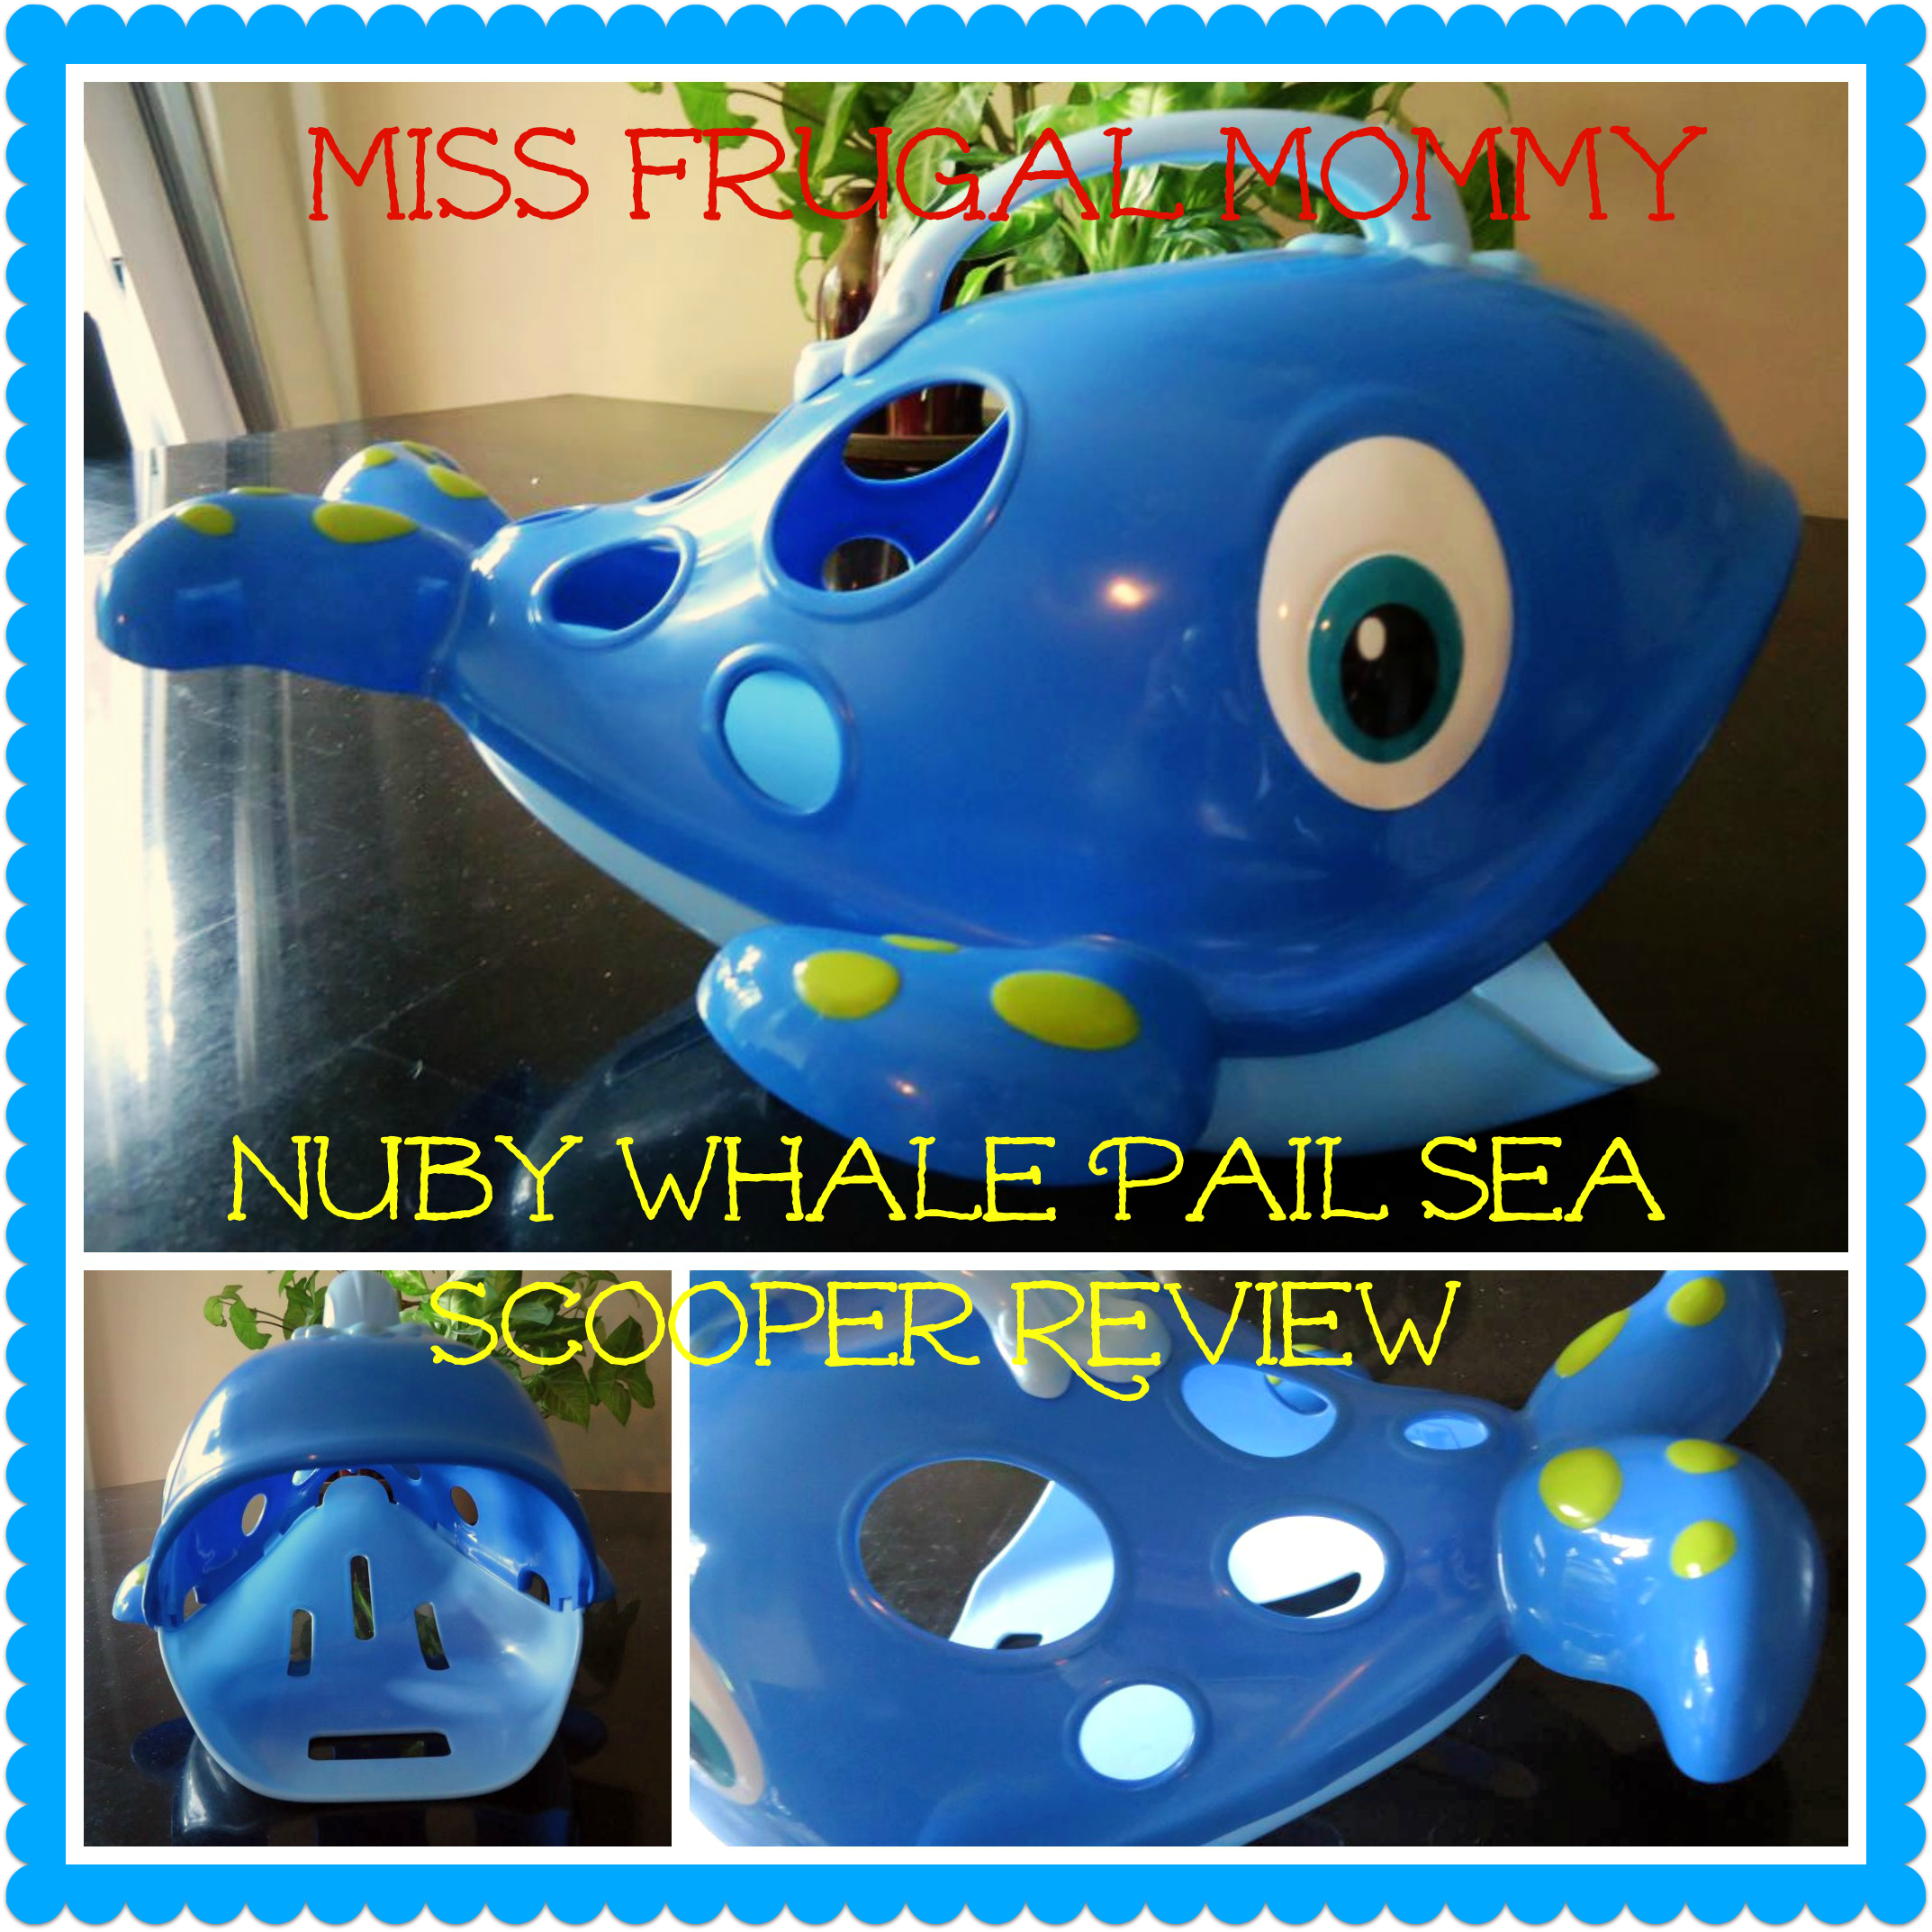 Nuby Whale Pail Sea Scooper Review